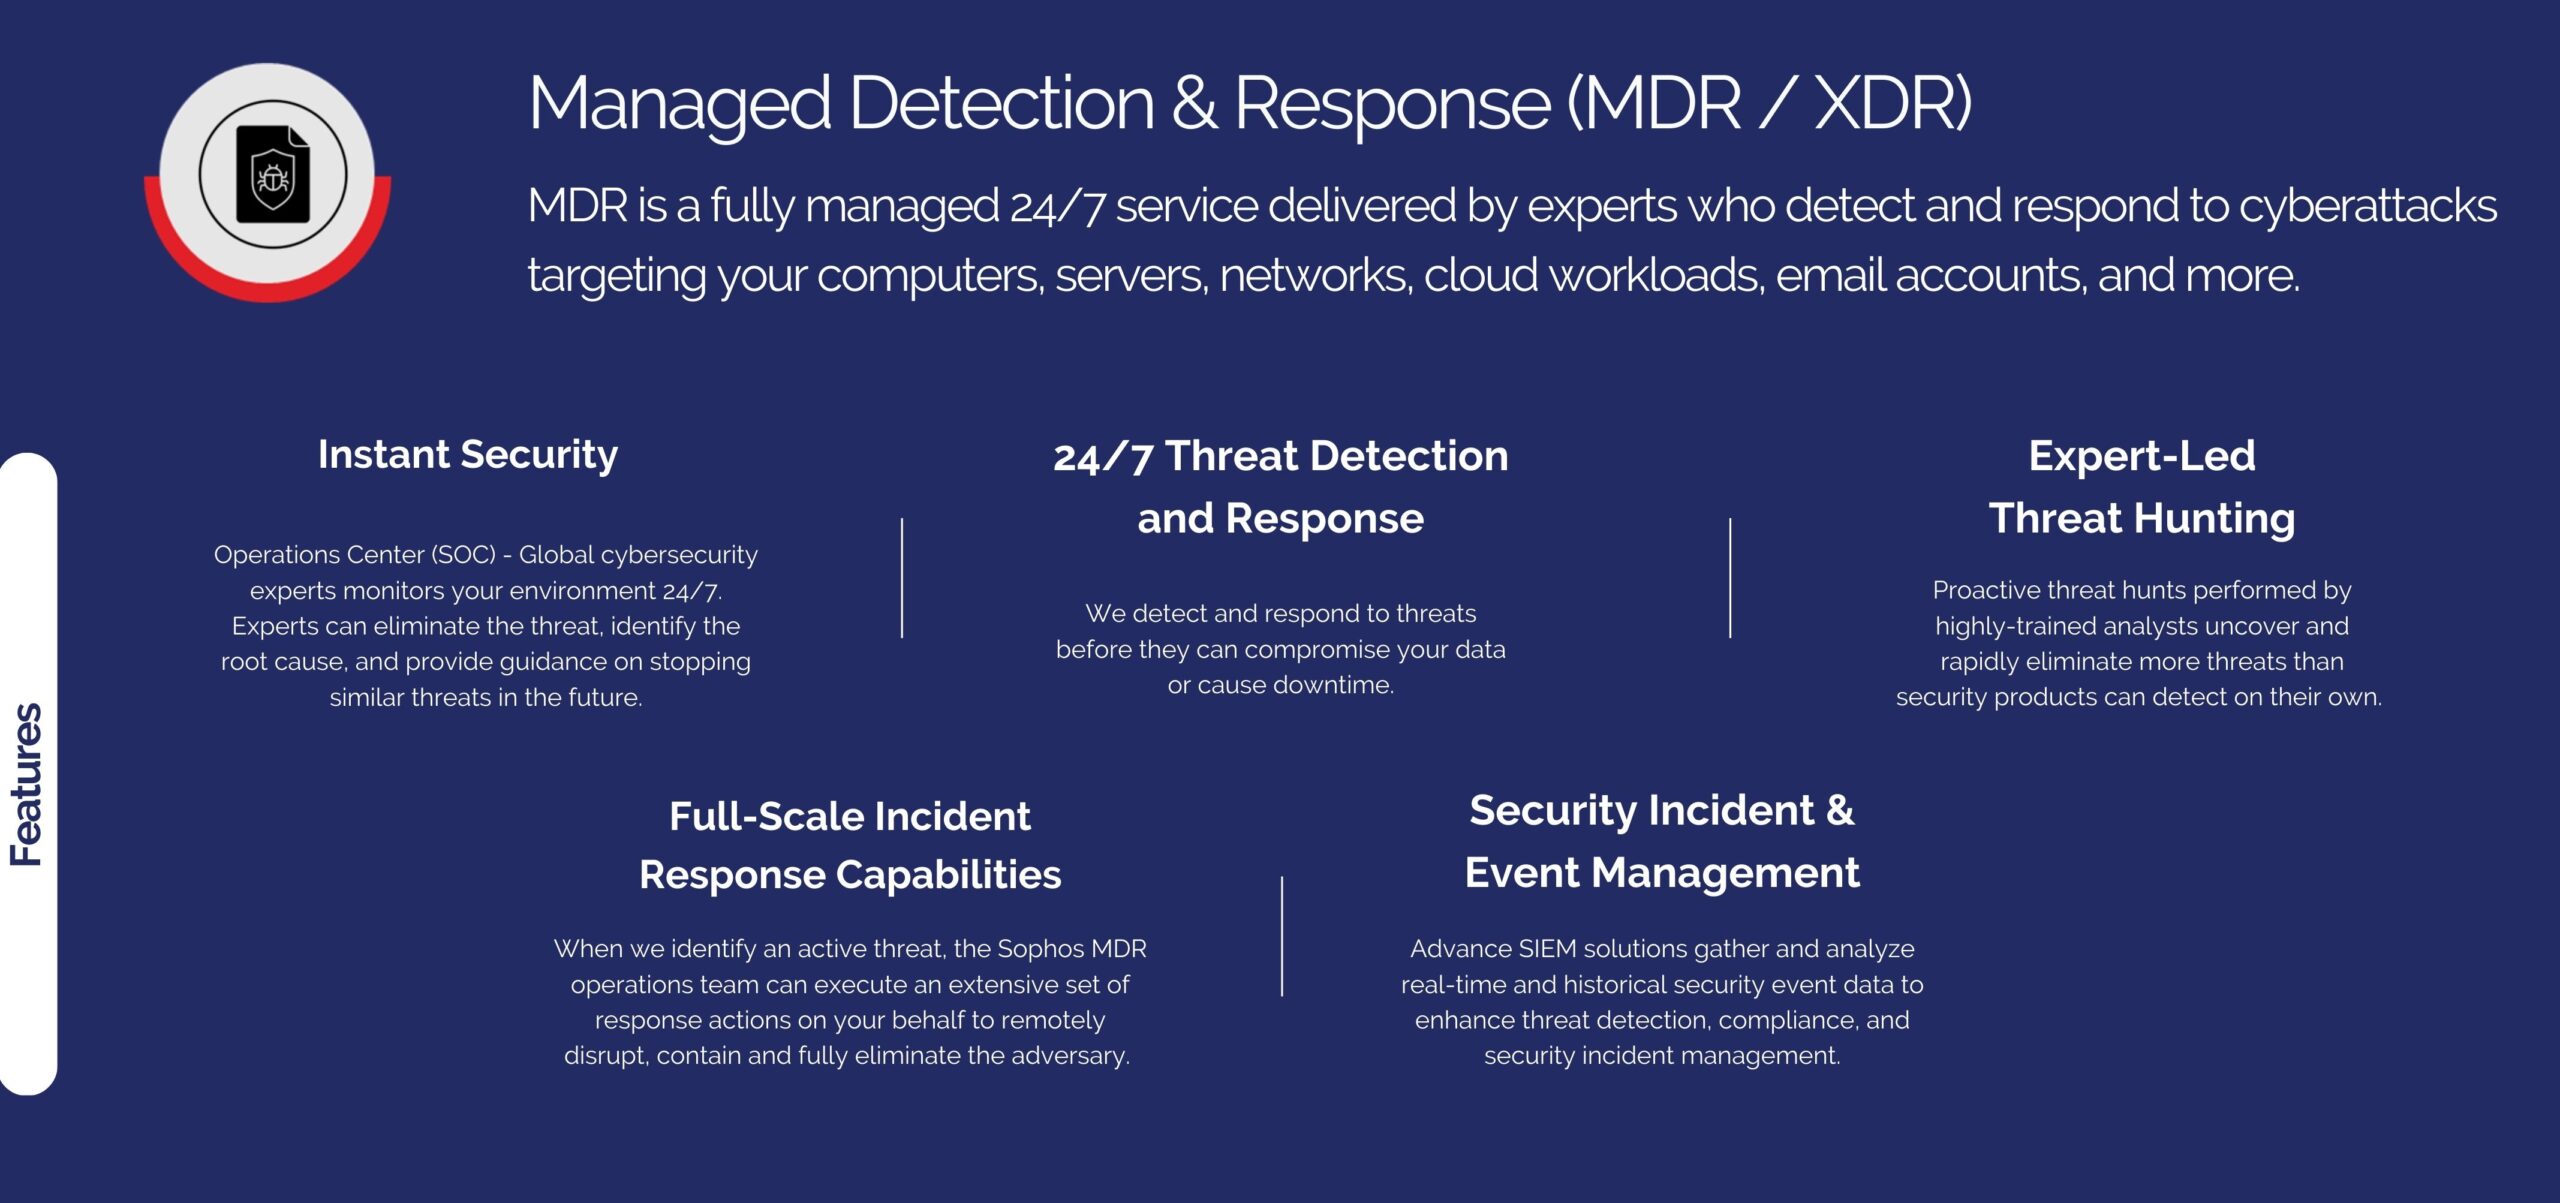 Cyber Security Managed Detection & Response (MDR XDR)